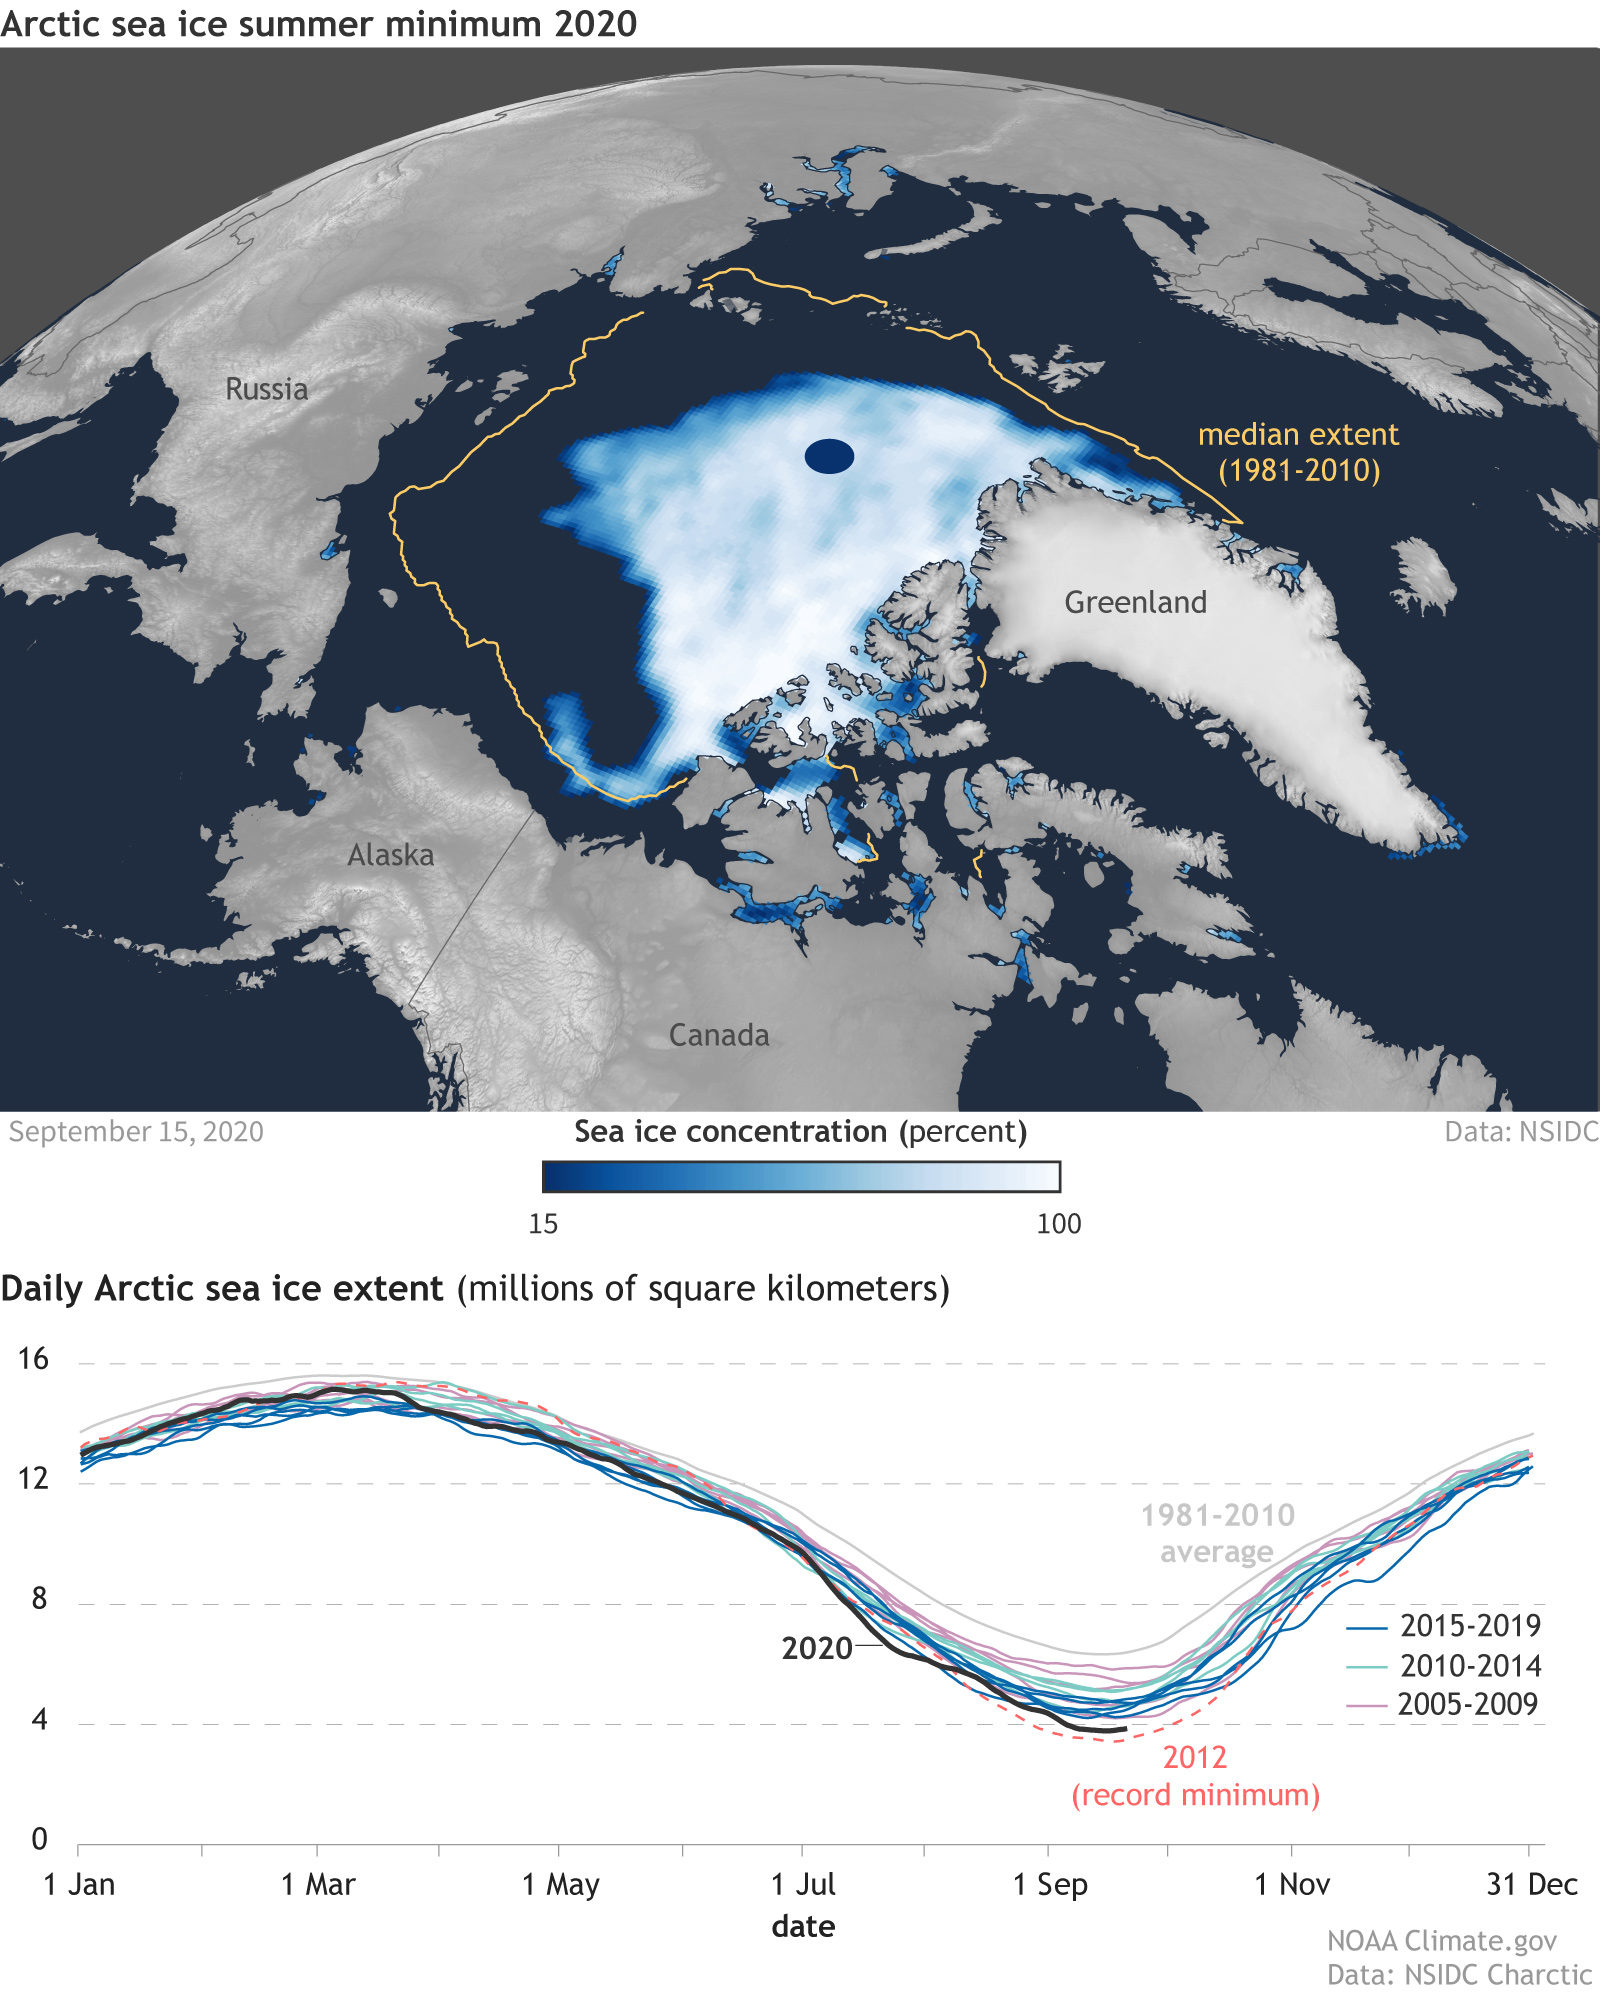 Top image: Sea ice concentration (light blue to white) on September 15, 2020, the day of the summer minimum extent. The gold line is the median extent for 1981-2010: half of years had smaller extents, half had larger. Bottom image: A graph of daily ice extent since 2005. Years 2005-2009 are light purple, the record-low year 2012 is salmon, other years for 2010-2014 are light green, and years 2015-2019 are blue. The 2020 daily extent line is in black.